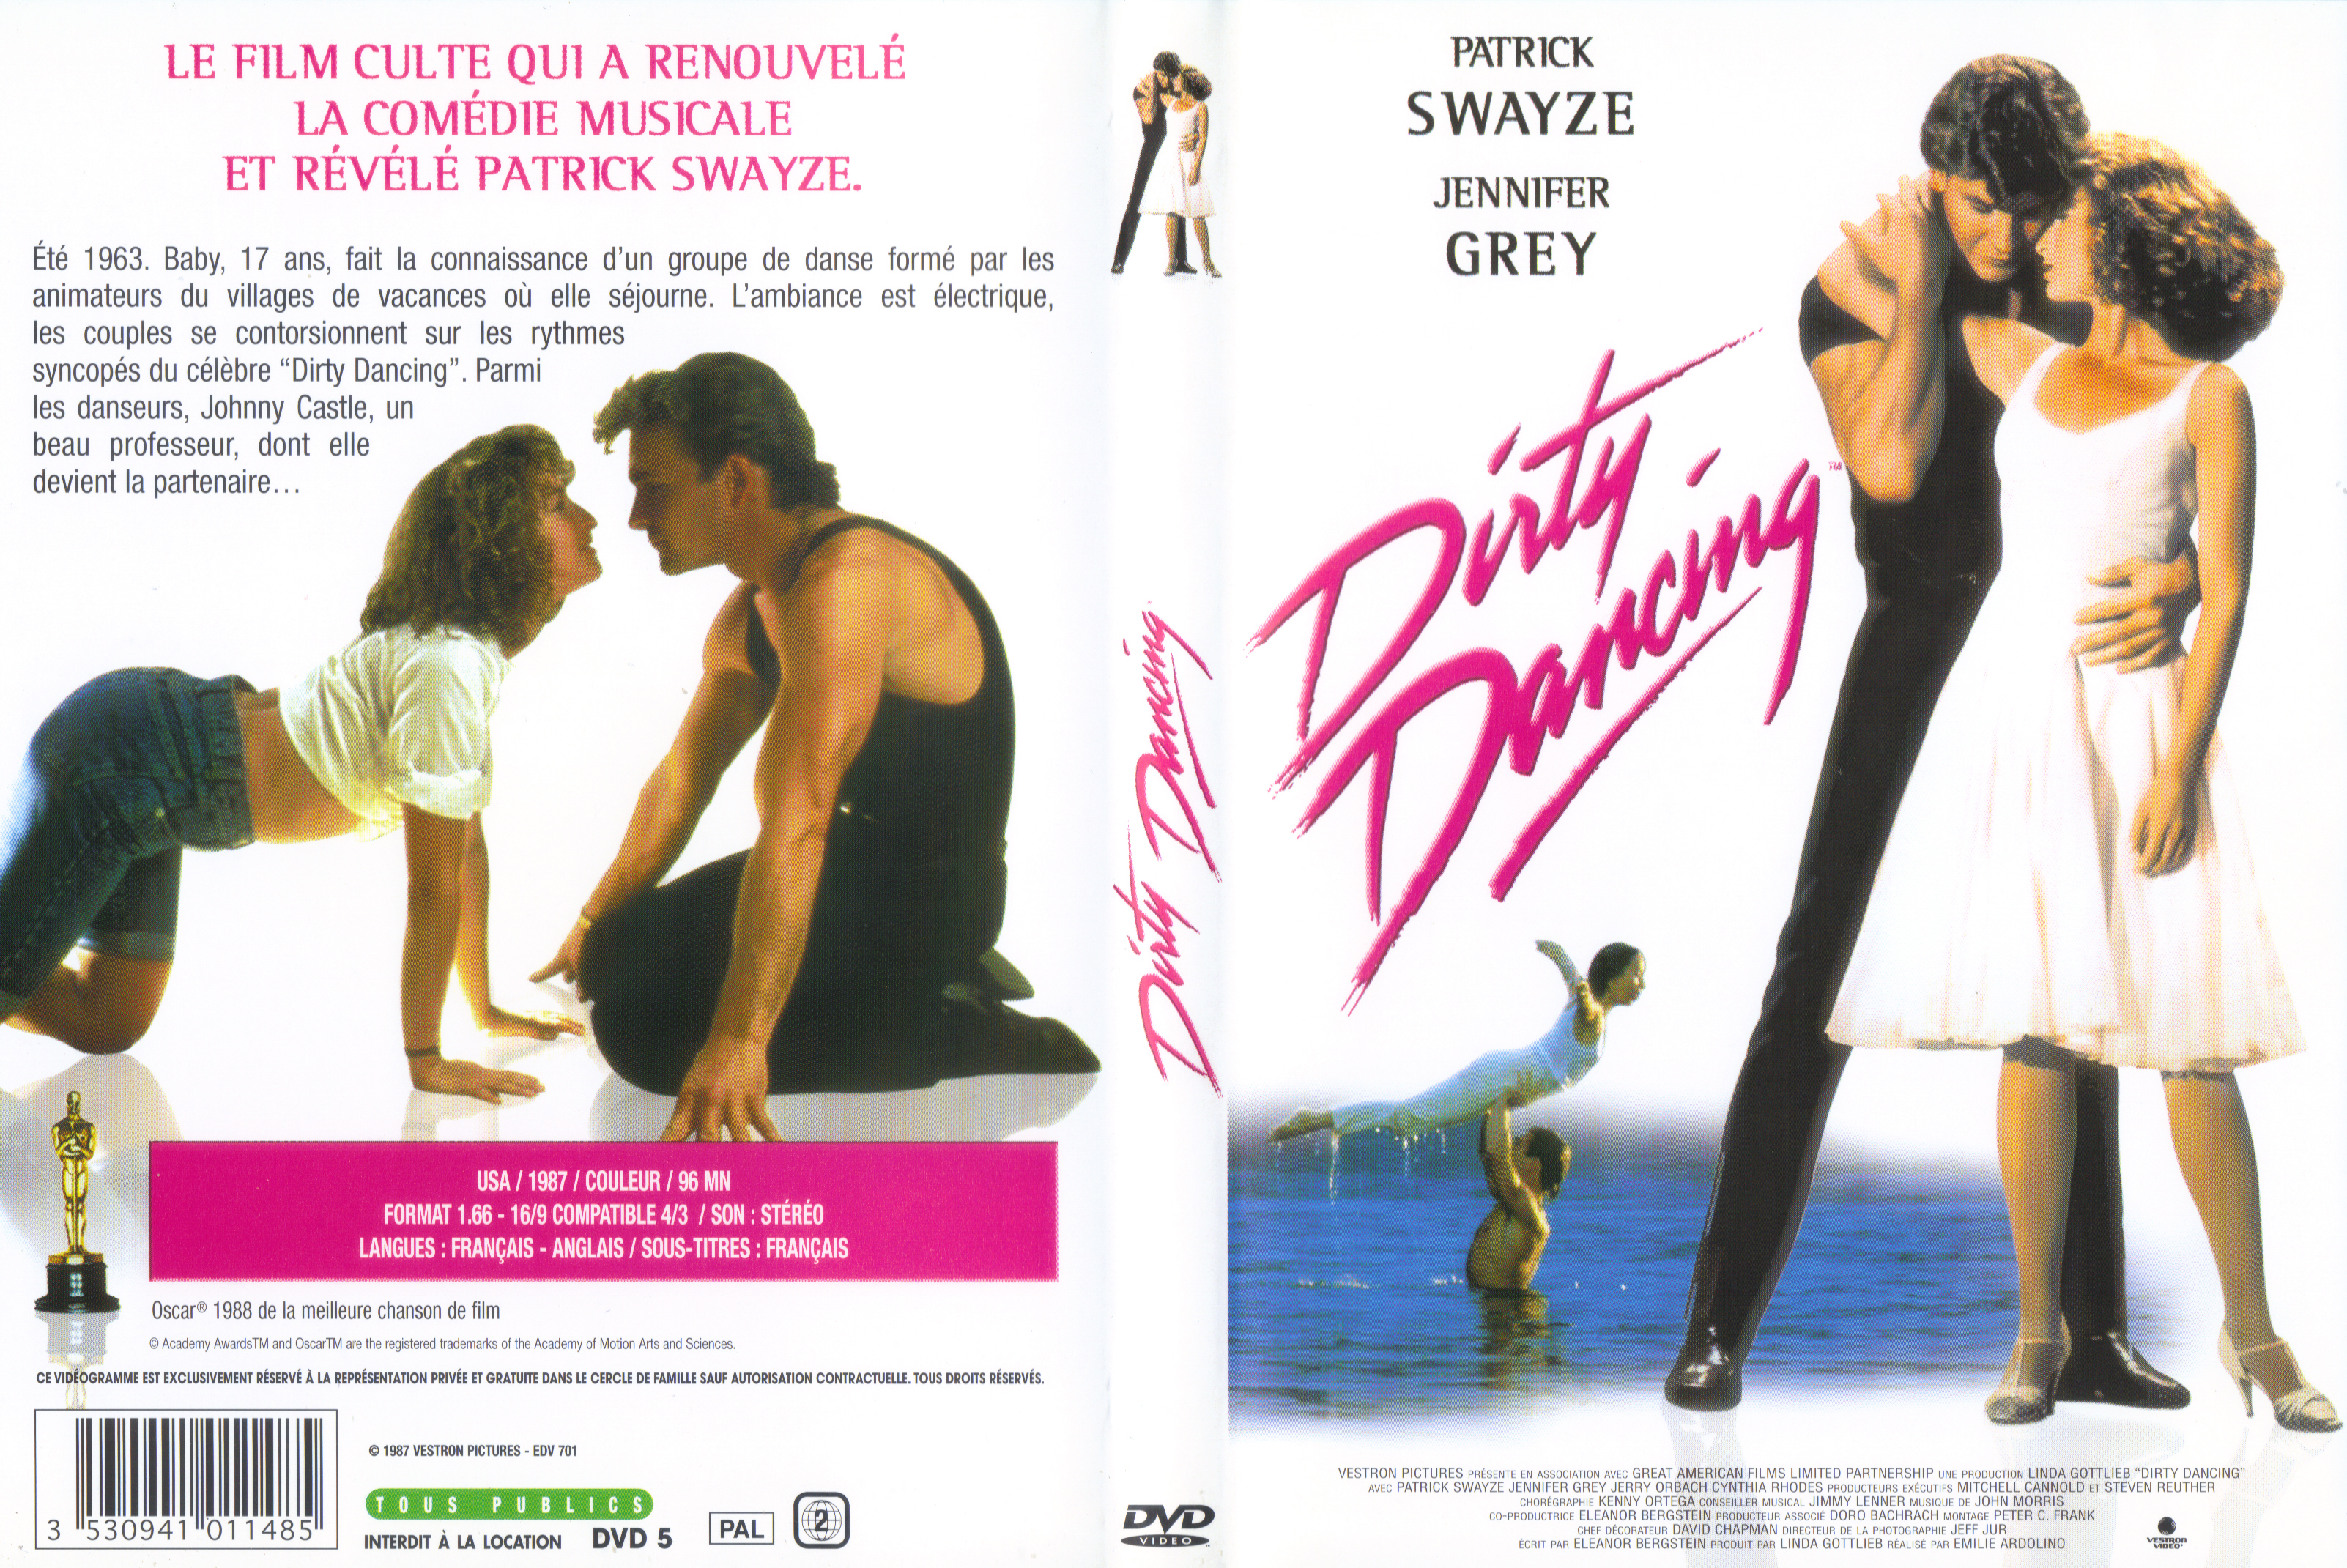 Jaquette DVD Dirty dancing v4